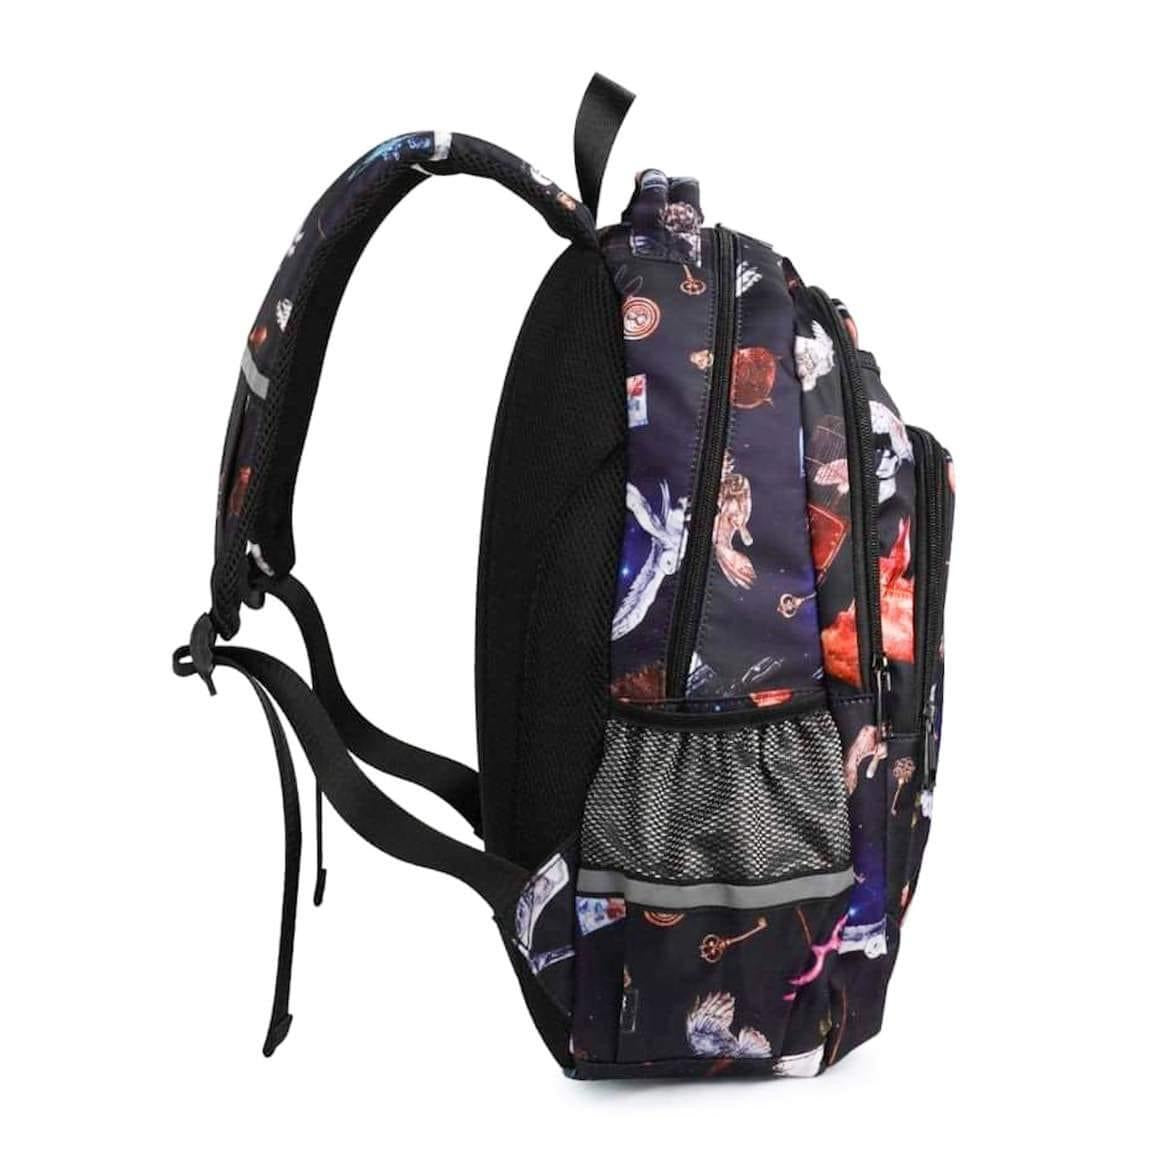 Mischief Managed Backpack